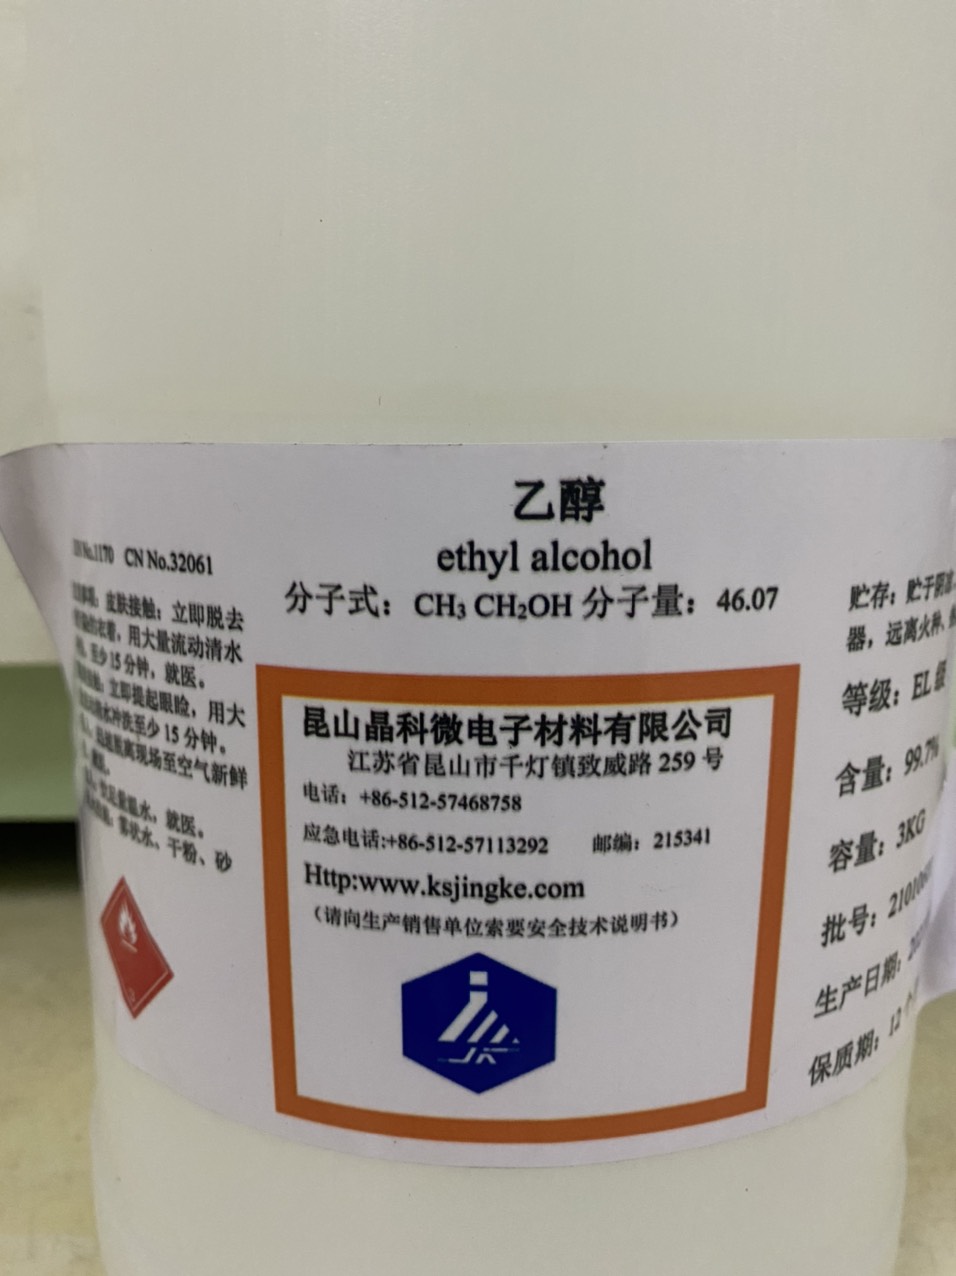 cộng c2h5oh+ ch3cooh+c2h6o giữa la gi c2h5oh-ch3cho phải pt 02 litro de emite quanto reaction mengiam c2h5oh+3o2 xt co c2h6o2 c2h6oh c2h6o+3o2 k kali c2h5oh-c2h5ona ch3oh c2h5oh-c2h5br hno3 agno3 nh3 agno3+c2h5oh đọc truyện ether lewis structure for molar mass molecular shape formula of polar or nonpolar structural isomers 140 geometry ir spectrum c2h5oh+c2h5oh 3-dien buta dien butadien j ancol ctpt ct cthh 95 ethyl merck uses buy ethylic online 98 75 60 giá báo kg lít sát dùng vệ 97 fuel phú thọ boiling point density price test wiki uống where to sds pure hs code melting sheet value solubility in i2 td c2h6o+kmno4+h2so4 anhydrous c2h6o+h2so4 c2h6o+k2cr2o7+h2so4 140°c c 180 kiện cr2 so4 中文 cuoh2 weight etanol+na compound name na+c2h5oh 50 68 85 30 40 45° 9 spray percent can tphcm vp hà nội luyện 1170 70° 70o tp hcm đức giang việt nam cemaco bảng phiếu an nơi fisher function dna extraction sigma analysis percentage 100 l 200 proof what is brand prepared by concentration drink injection means trigeminal neuralgia rubbing 96° vwr spiritus polish ketonatus 90° 190 degree hand sanitizer grados lọ xanh electron vietnamese   cost   vietnam   popular   